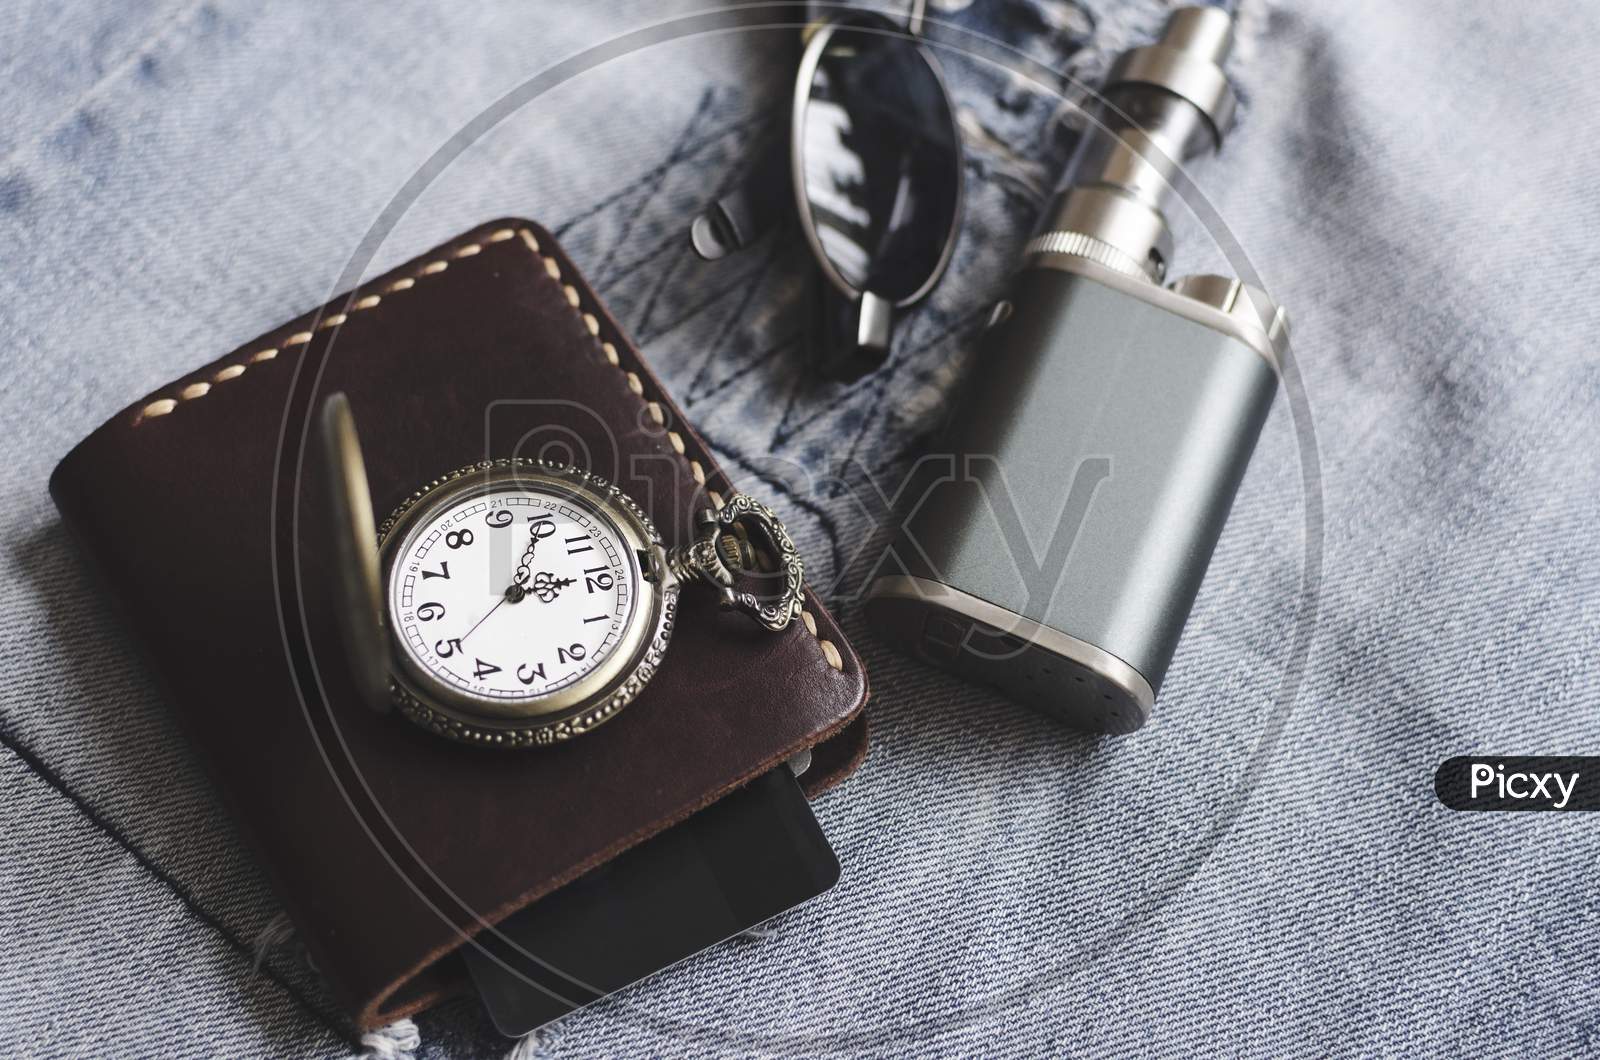 Man Accessories, Watch, Wallet, E Cigarette And Glasses